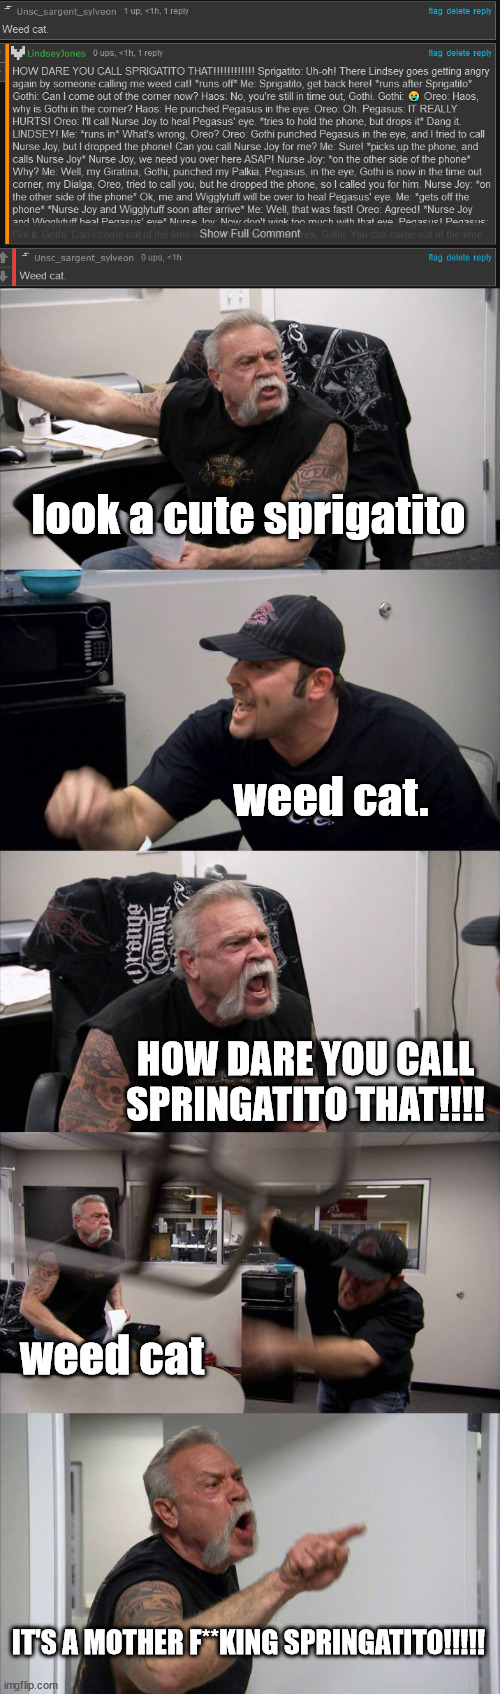 sylveon and lindesy be like | look a cute sprigatito; weed cat. HOW DARE YOU CALL SPRINGATITO THAT!!!! weed cat; IT'S A MOTHER F**KING SPRINGATITO!!!!! | image tagged in memes,american chopper argument | made w/ Imgflip meme maker